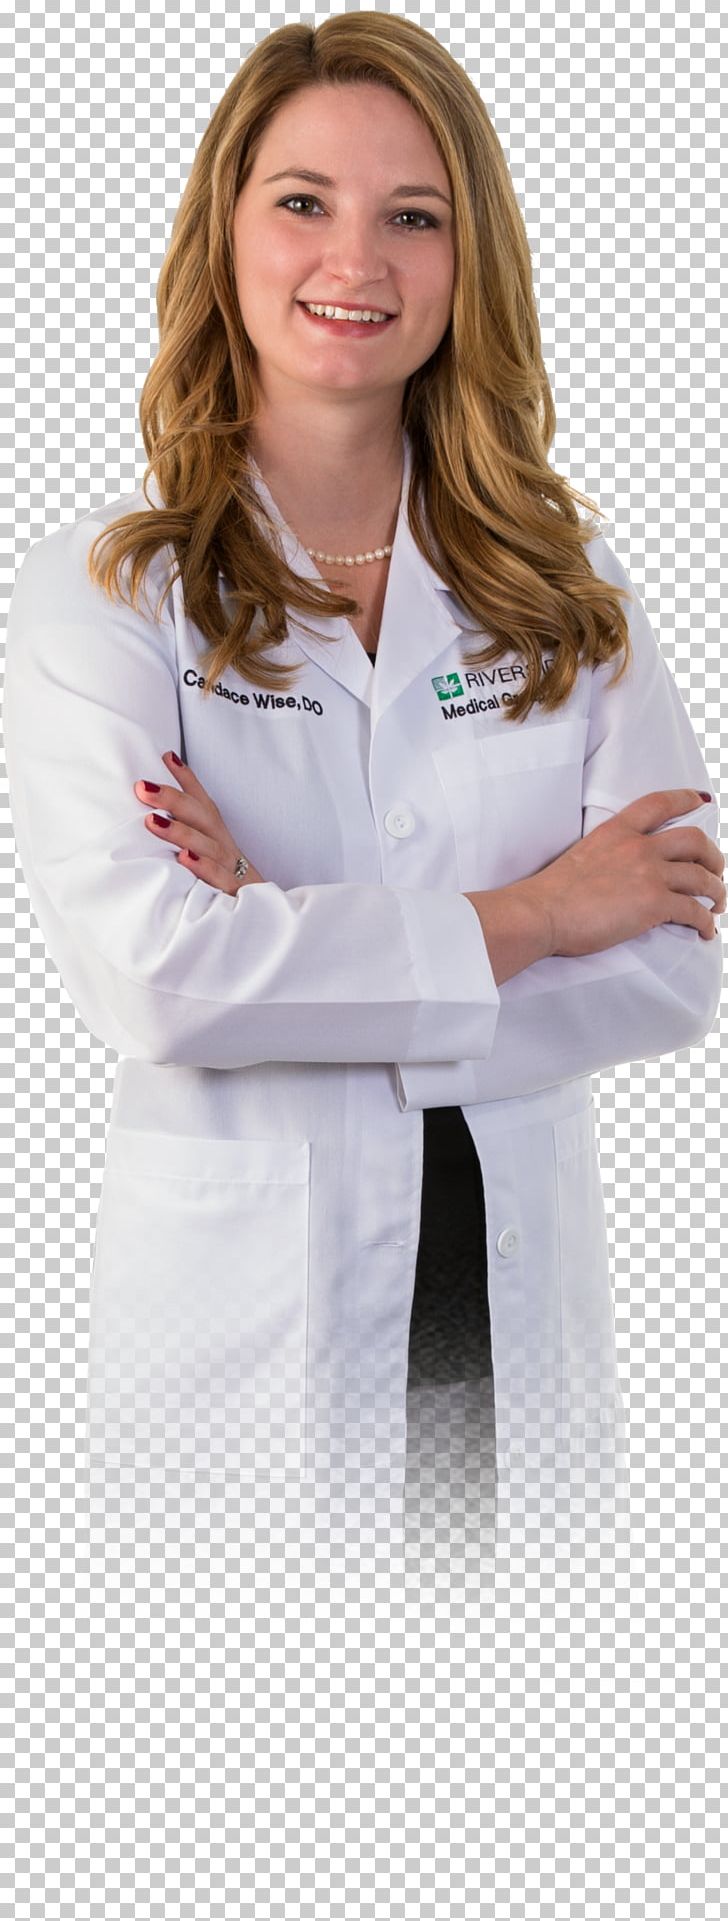 Lab Coats Physician Assistant Nurse Practitioner Stethoscope PNG, Clipart, Arm, Blouse, Clothing, Dress Shirt, General Practitioner Free PNG Download